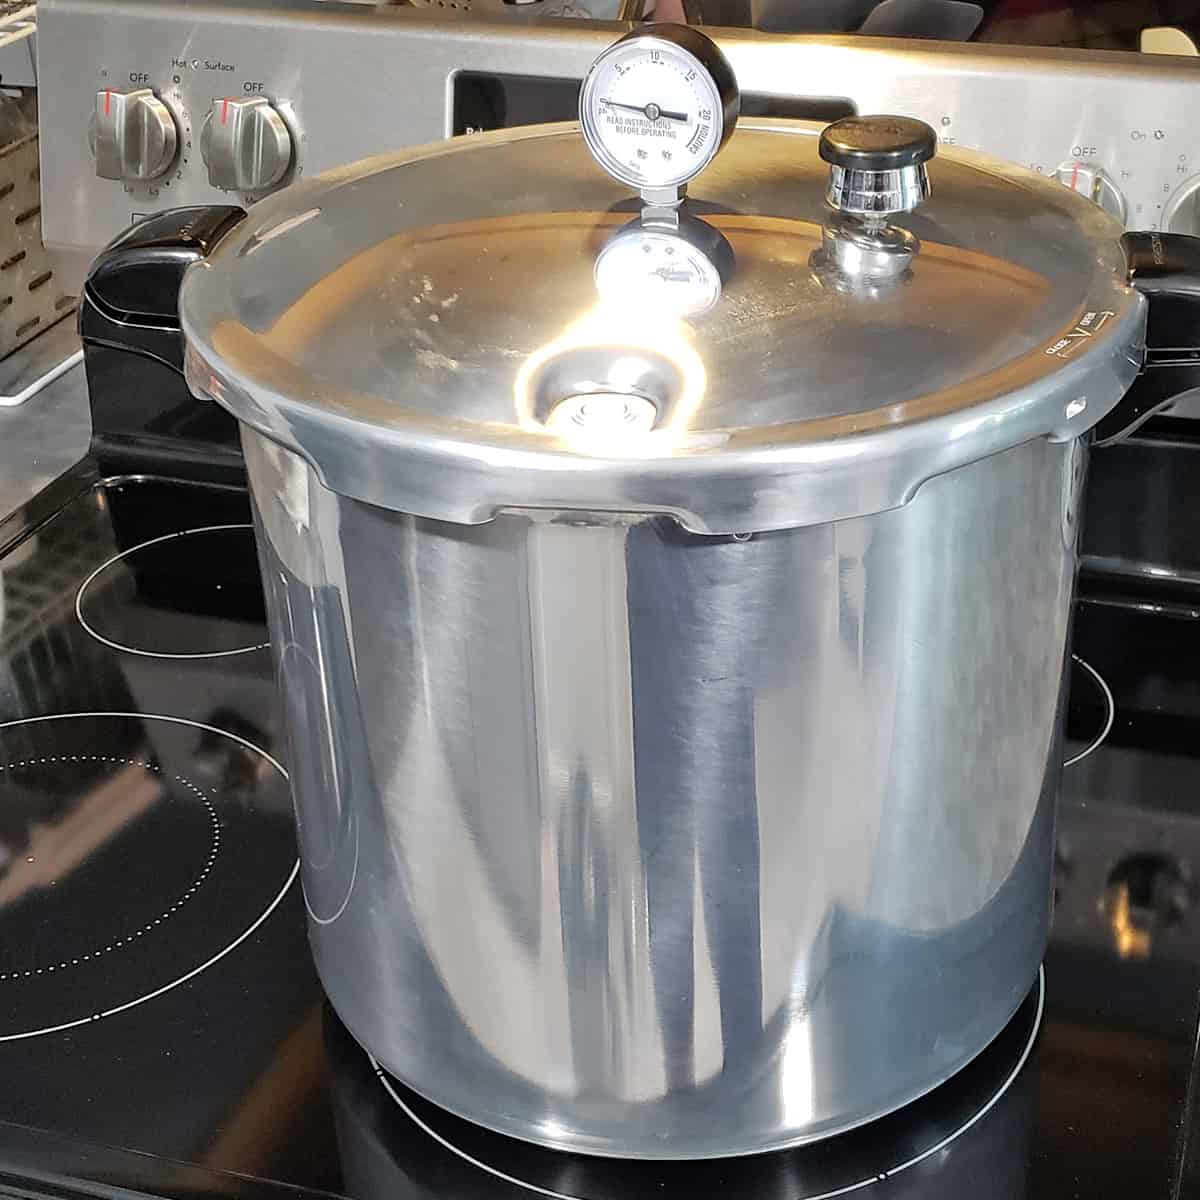 How to can using the Presto Electric Pressure Canner. Steps that go a, Canning Foods